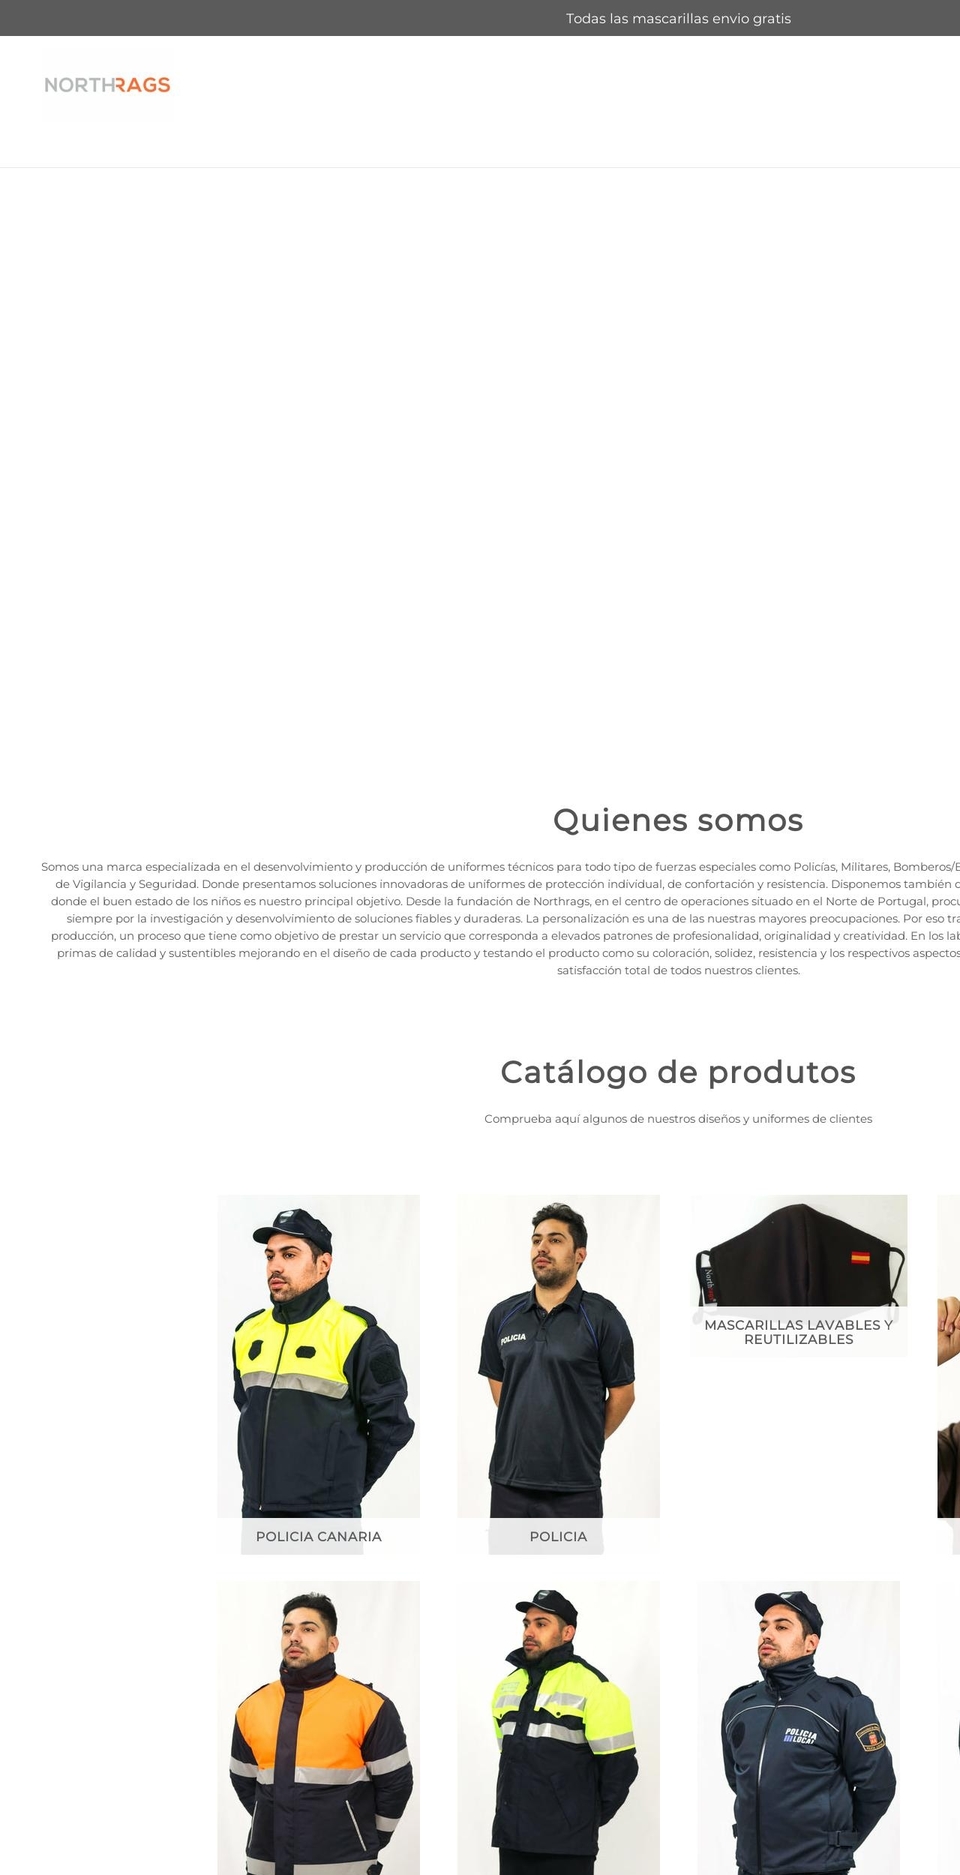 North Shopify theme site example northrags.es